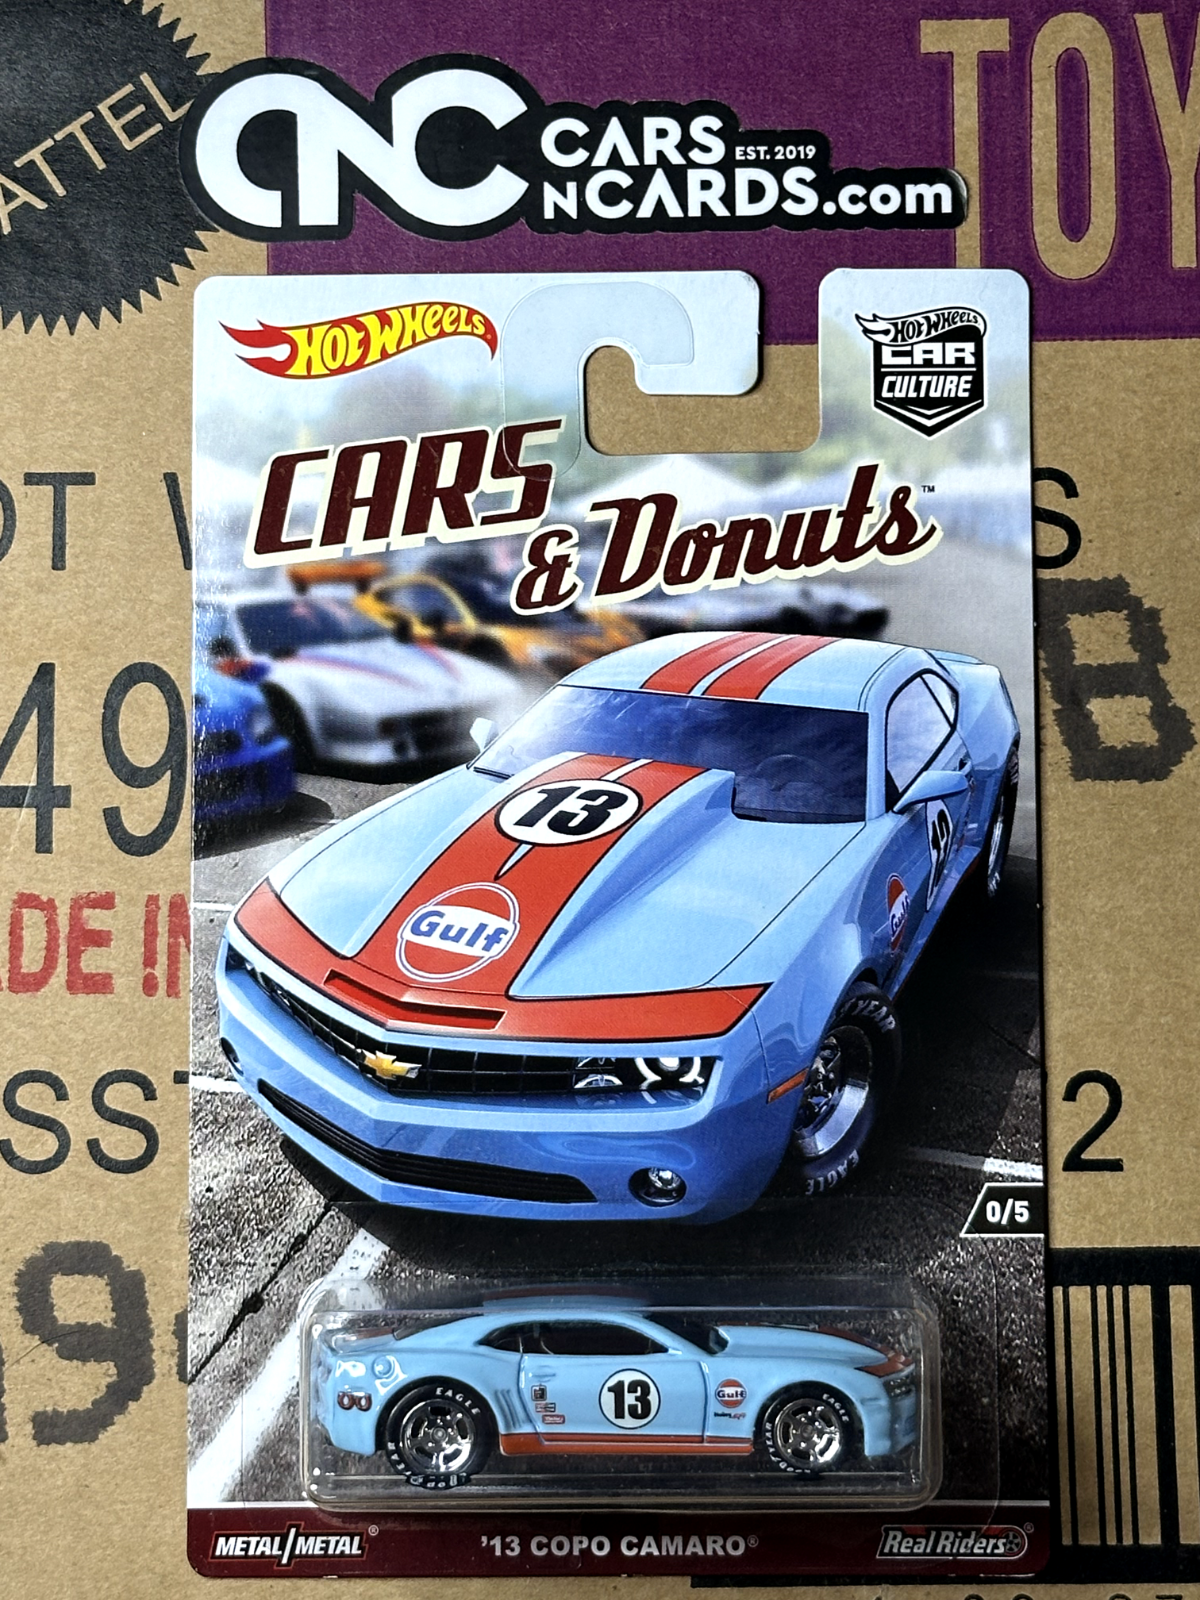 2017 Hot Wheels Cars & Donuts Chase Gulf '13 Copo Camaro With Protector